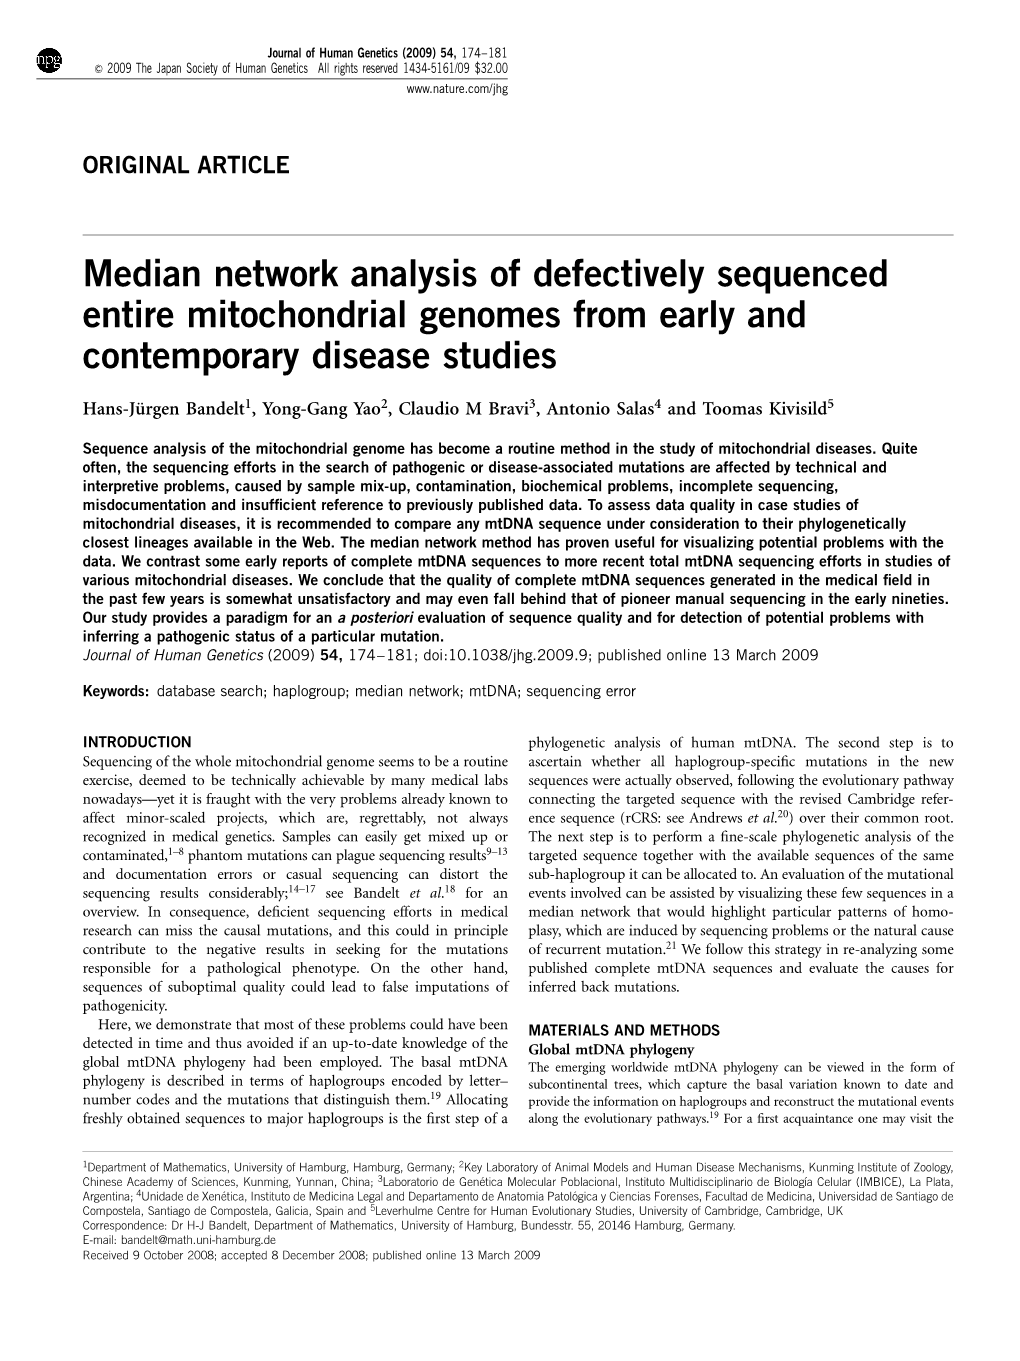 Median Network Analysis of Defectively Sequenced Entire Mitochondrial Genomes from Early and Contemporary Disease Studies